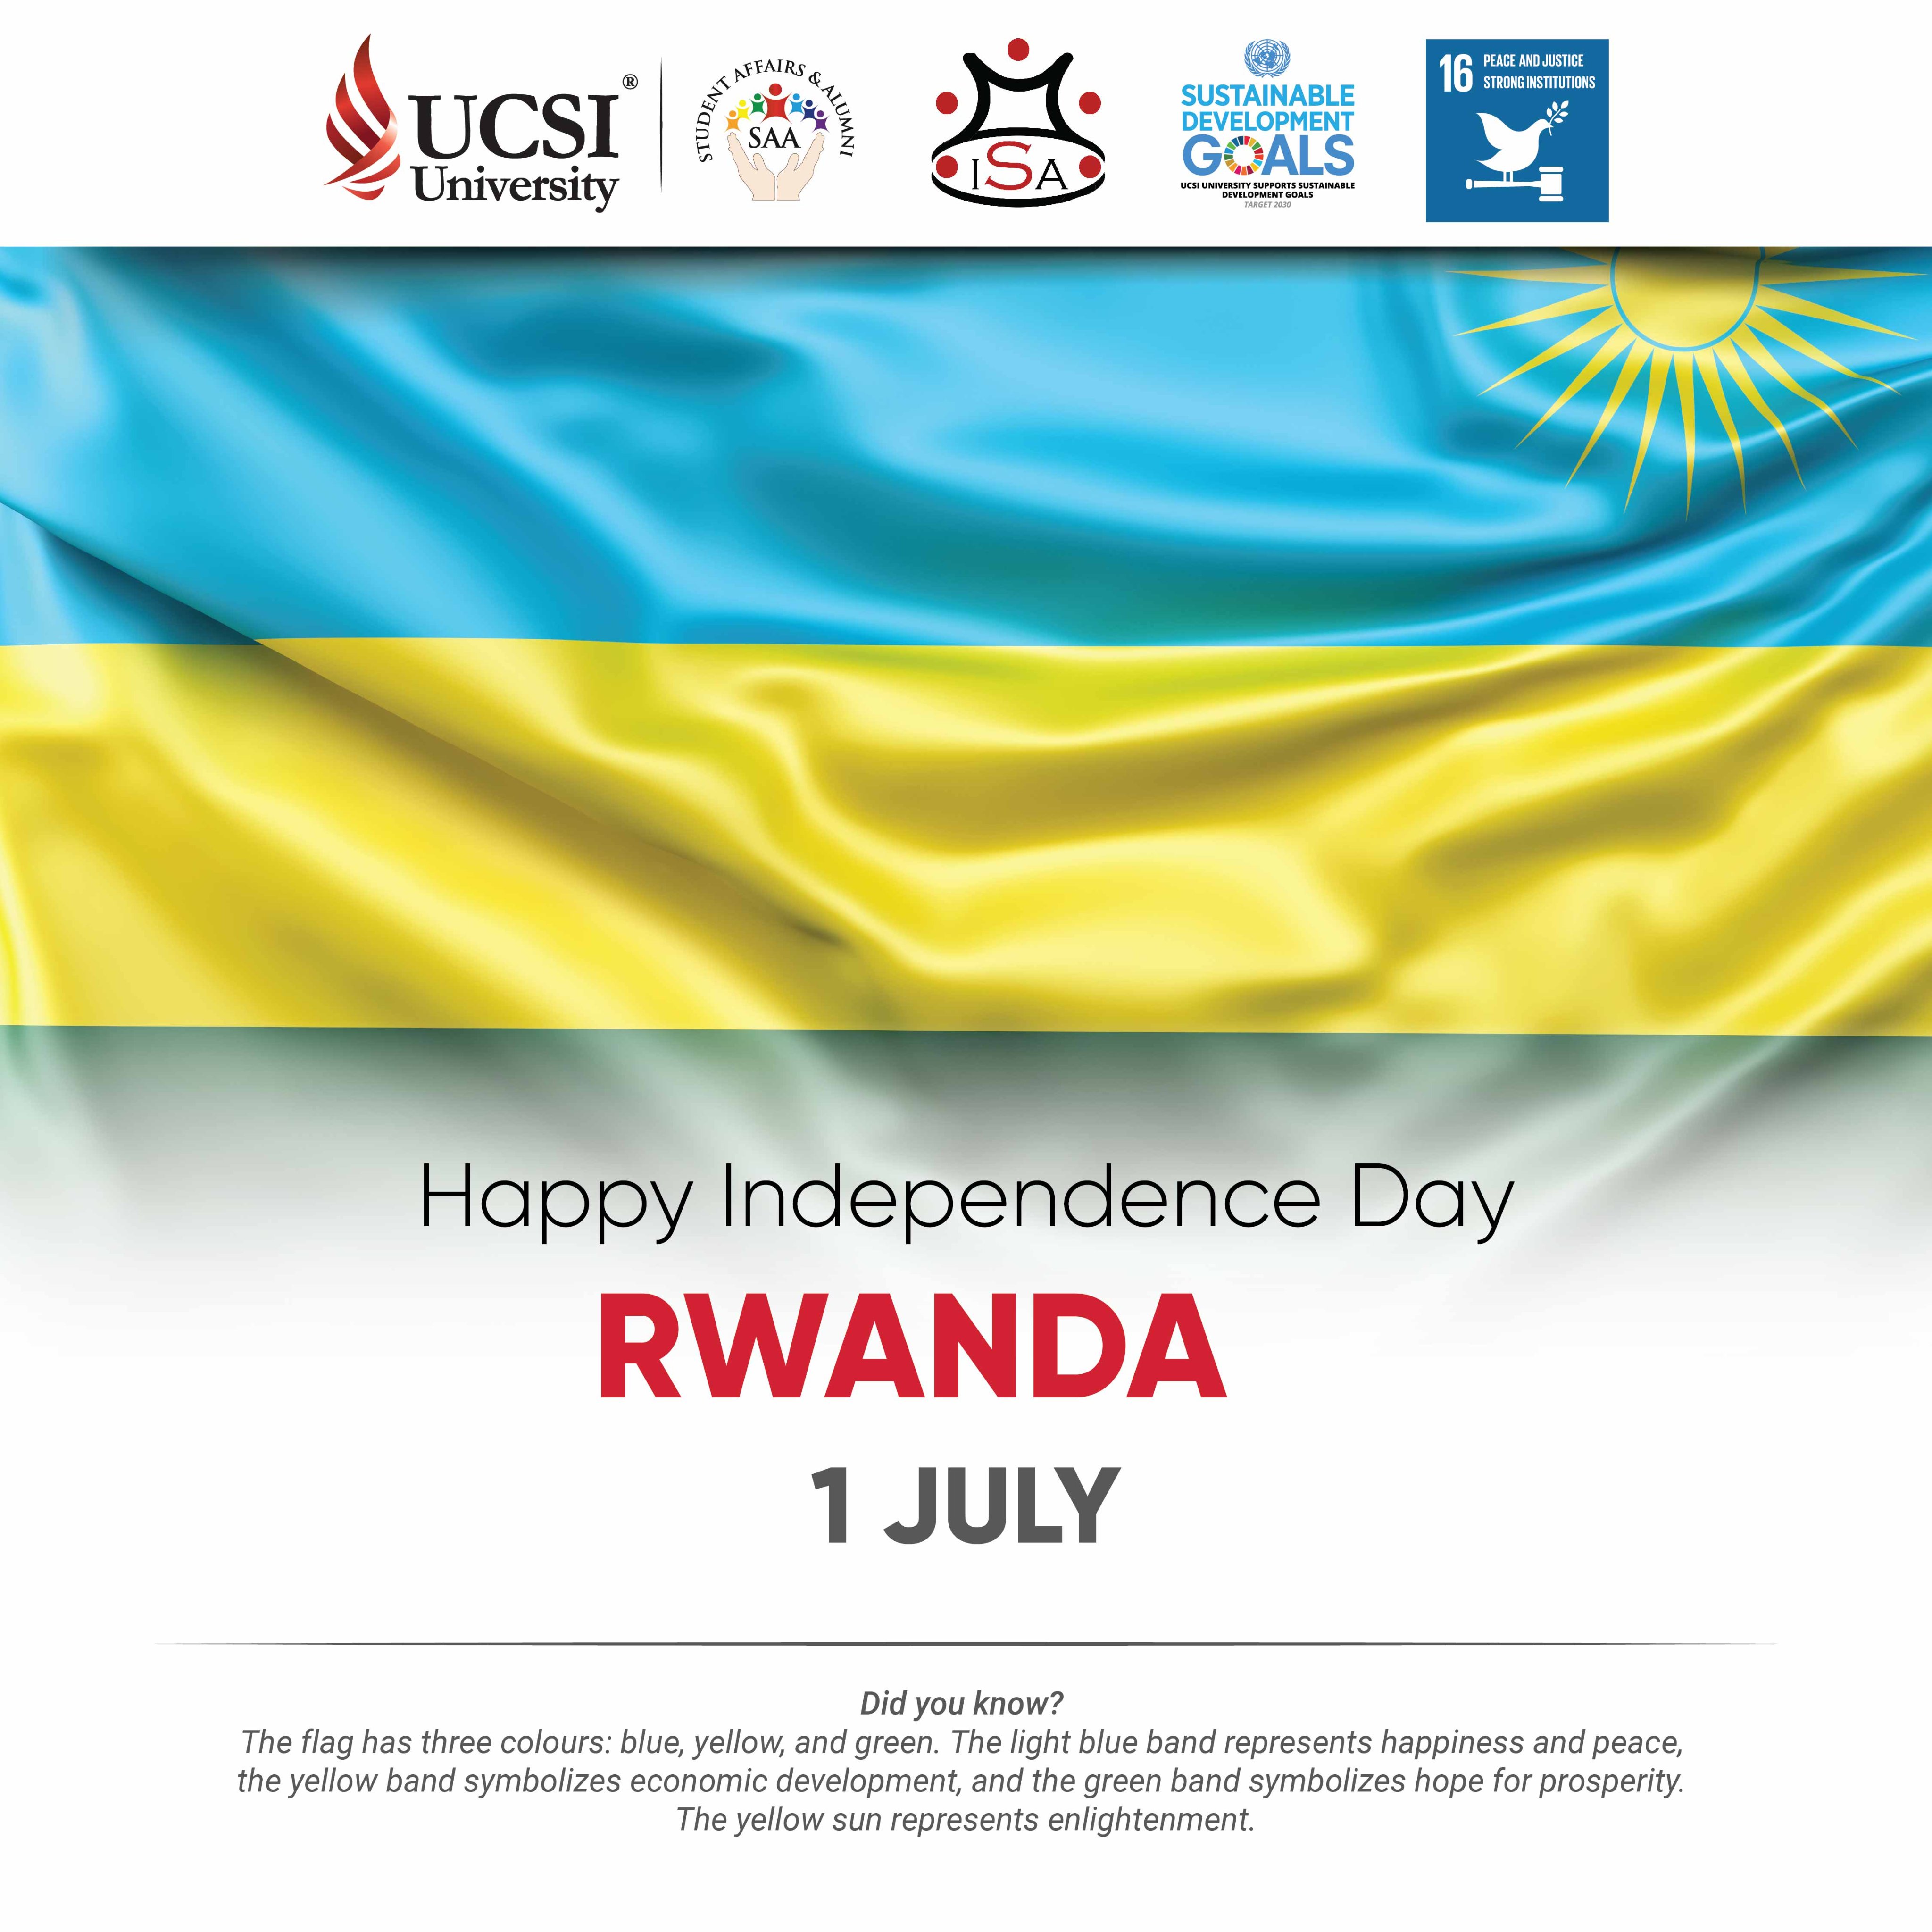 Normalisering ambition riffel UCSI University on Twitter: "Happy Independence Day Rwanda! The flag has  three colours: blue, yellow, and green. The light blue band represents  happiness and peace, the yellow band symbolizes economic development, and